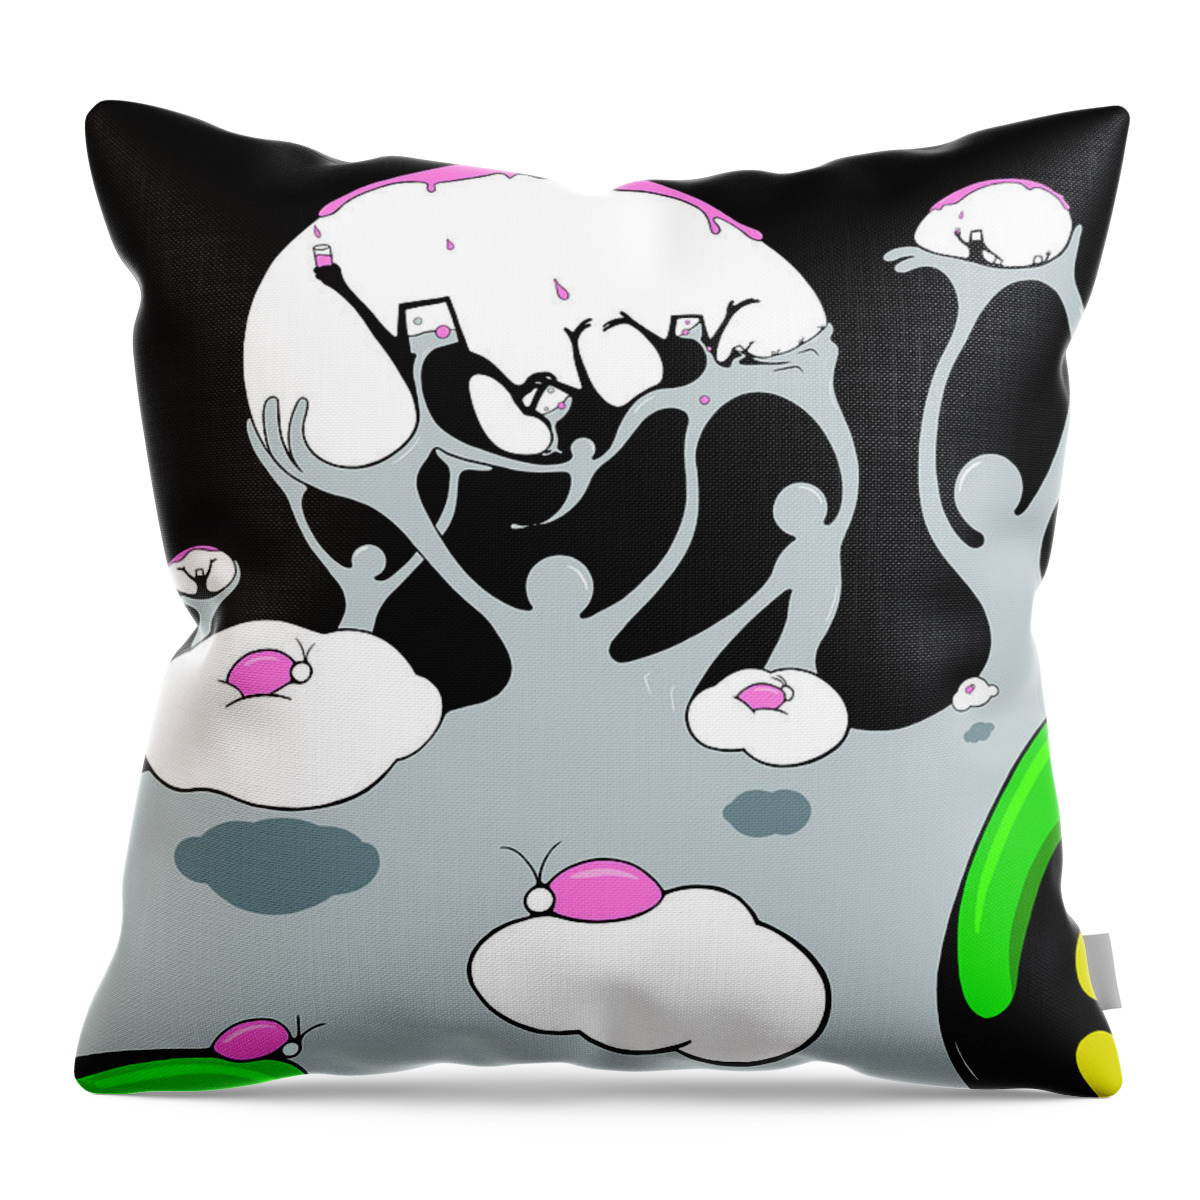 Vine Throw Pillow featuring the drawing Psychonauts by Craig Tilley